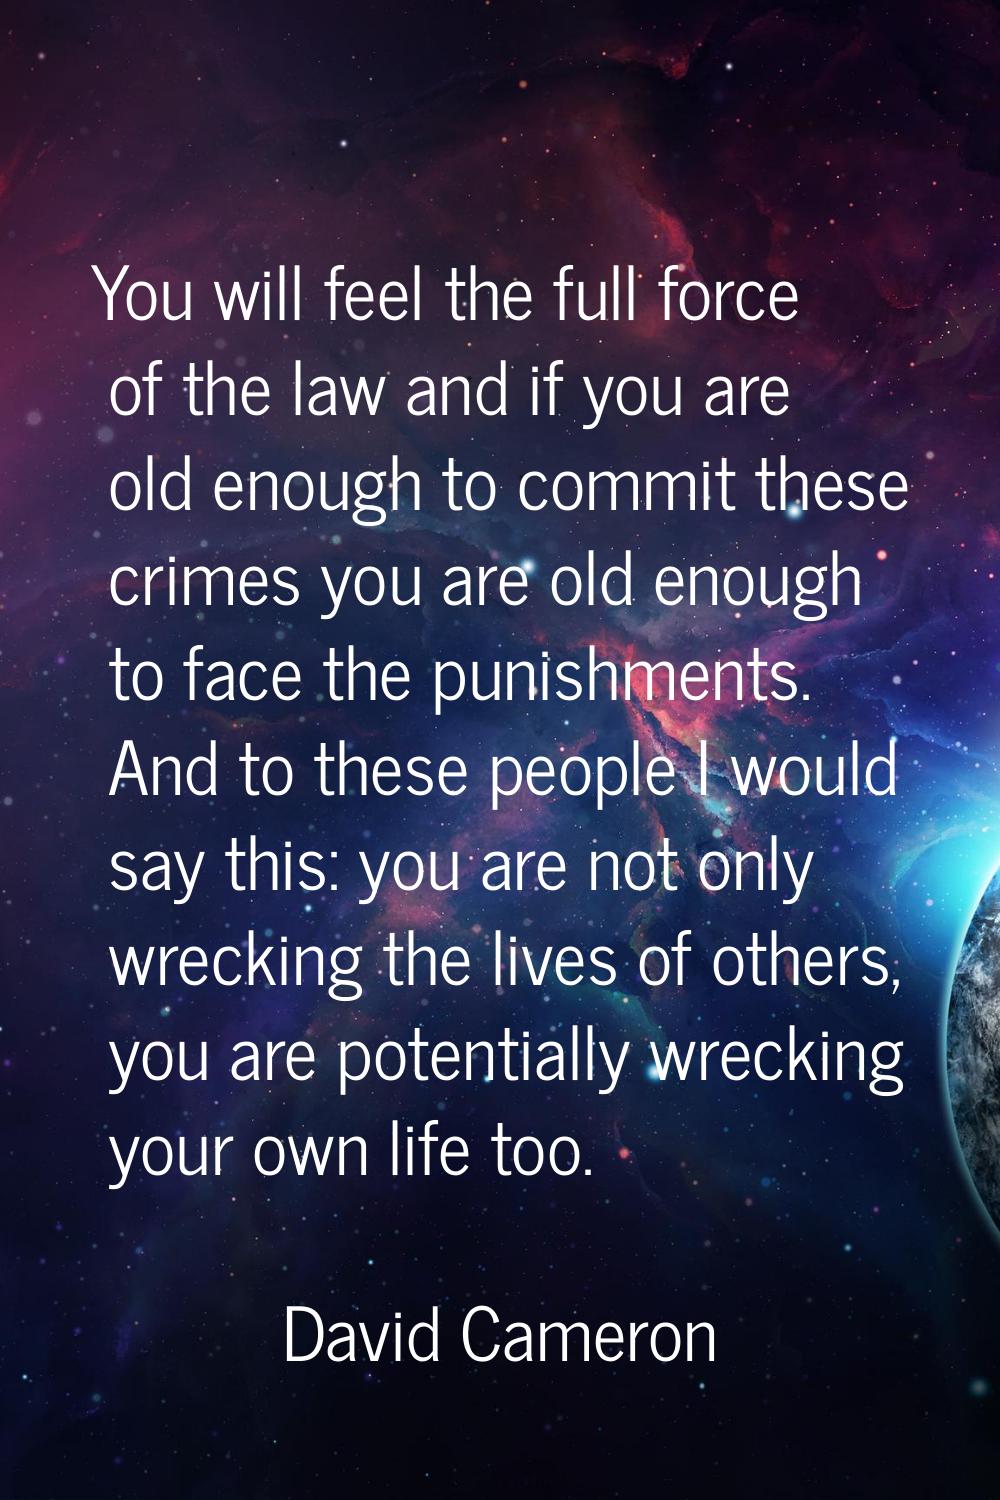 You will feel the full force of the law and if you are old enough to commit these crimes you are ol